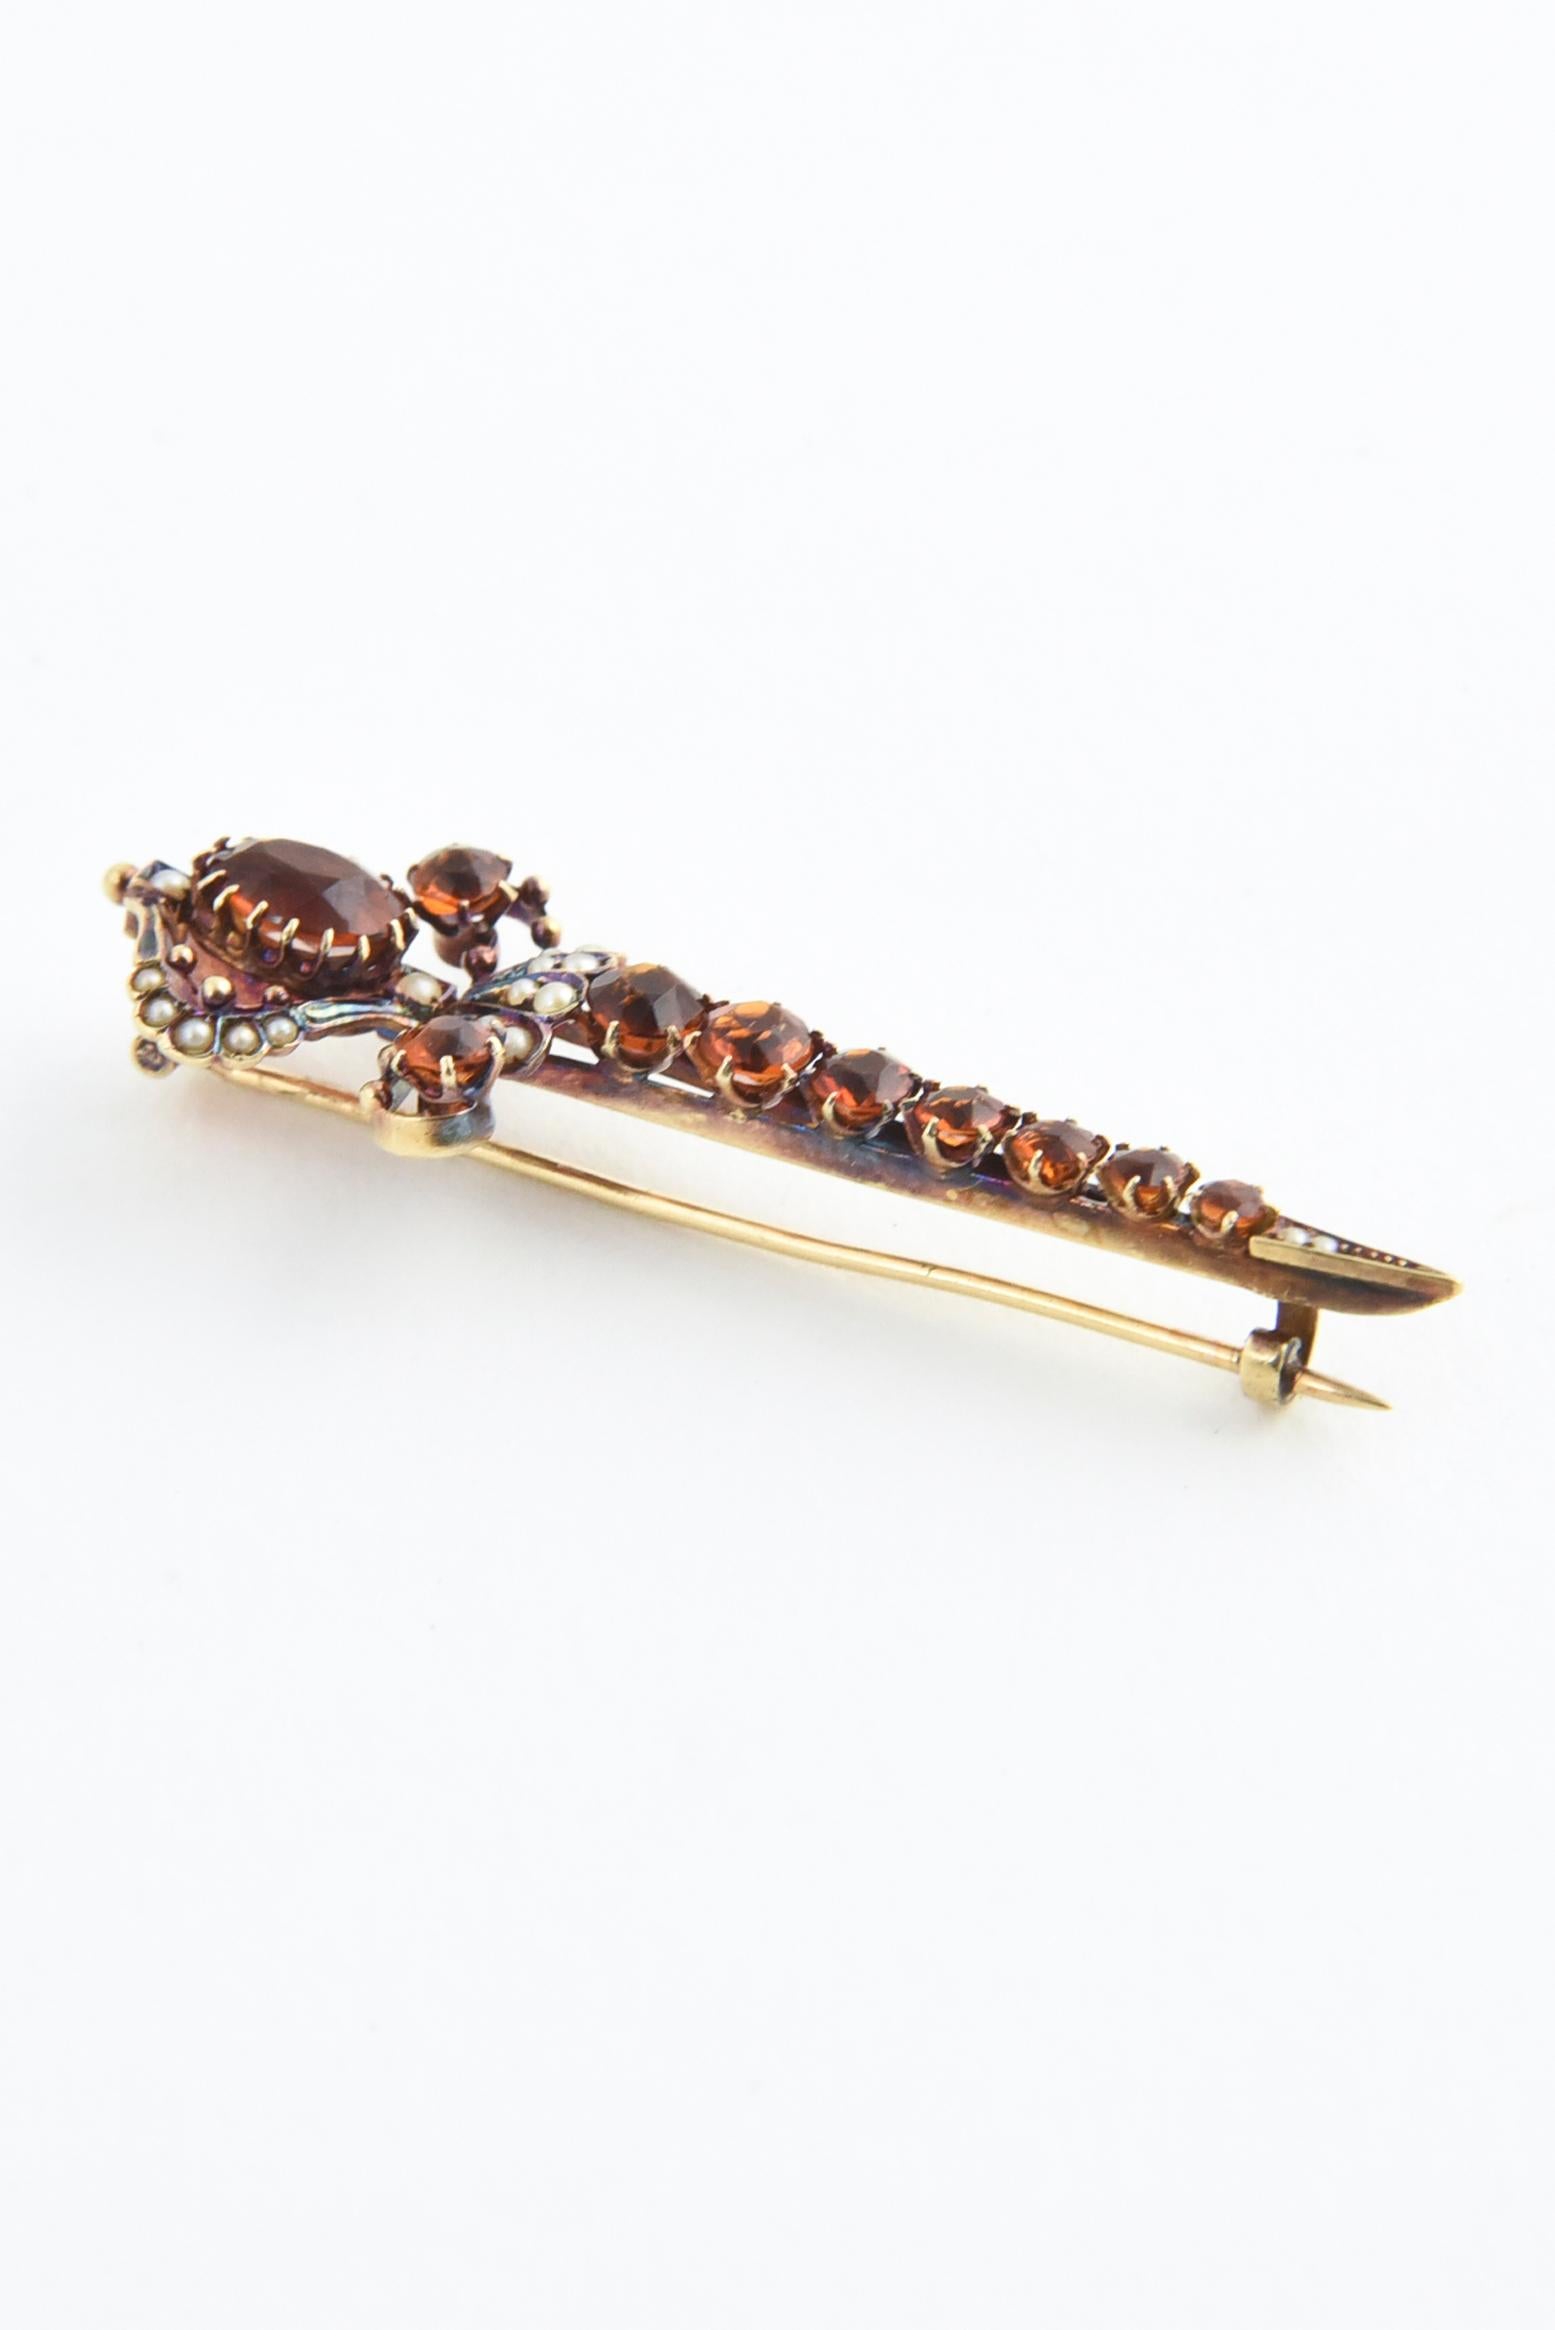 Victorian 14K gold sword brooch featuring 10 graduated size citrine stones, tiny seed pearls, and gold accents.